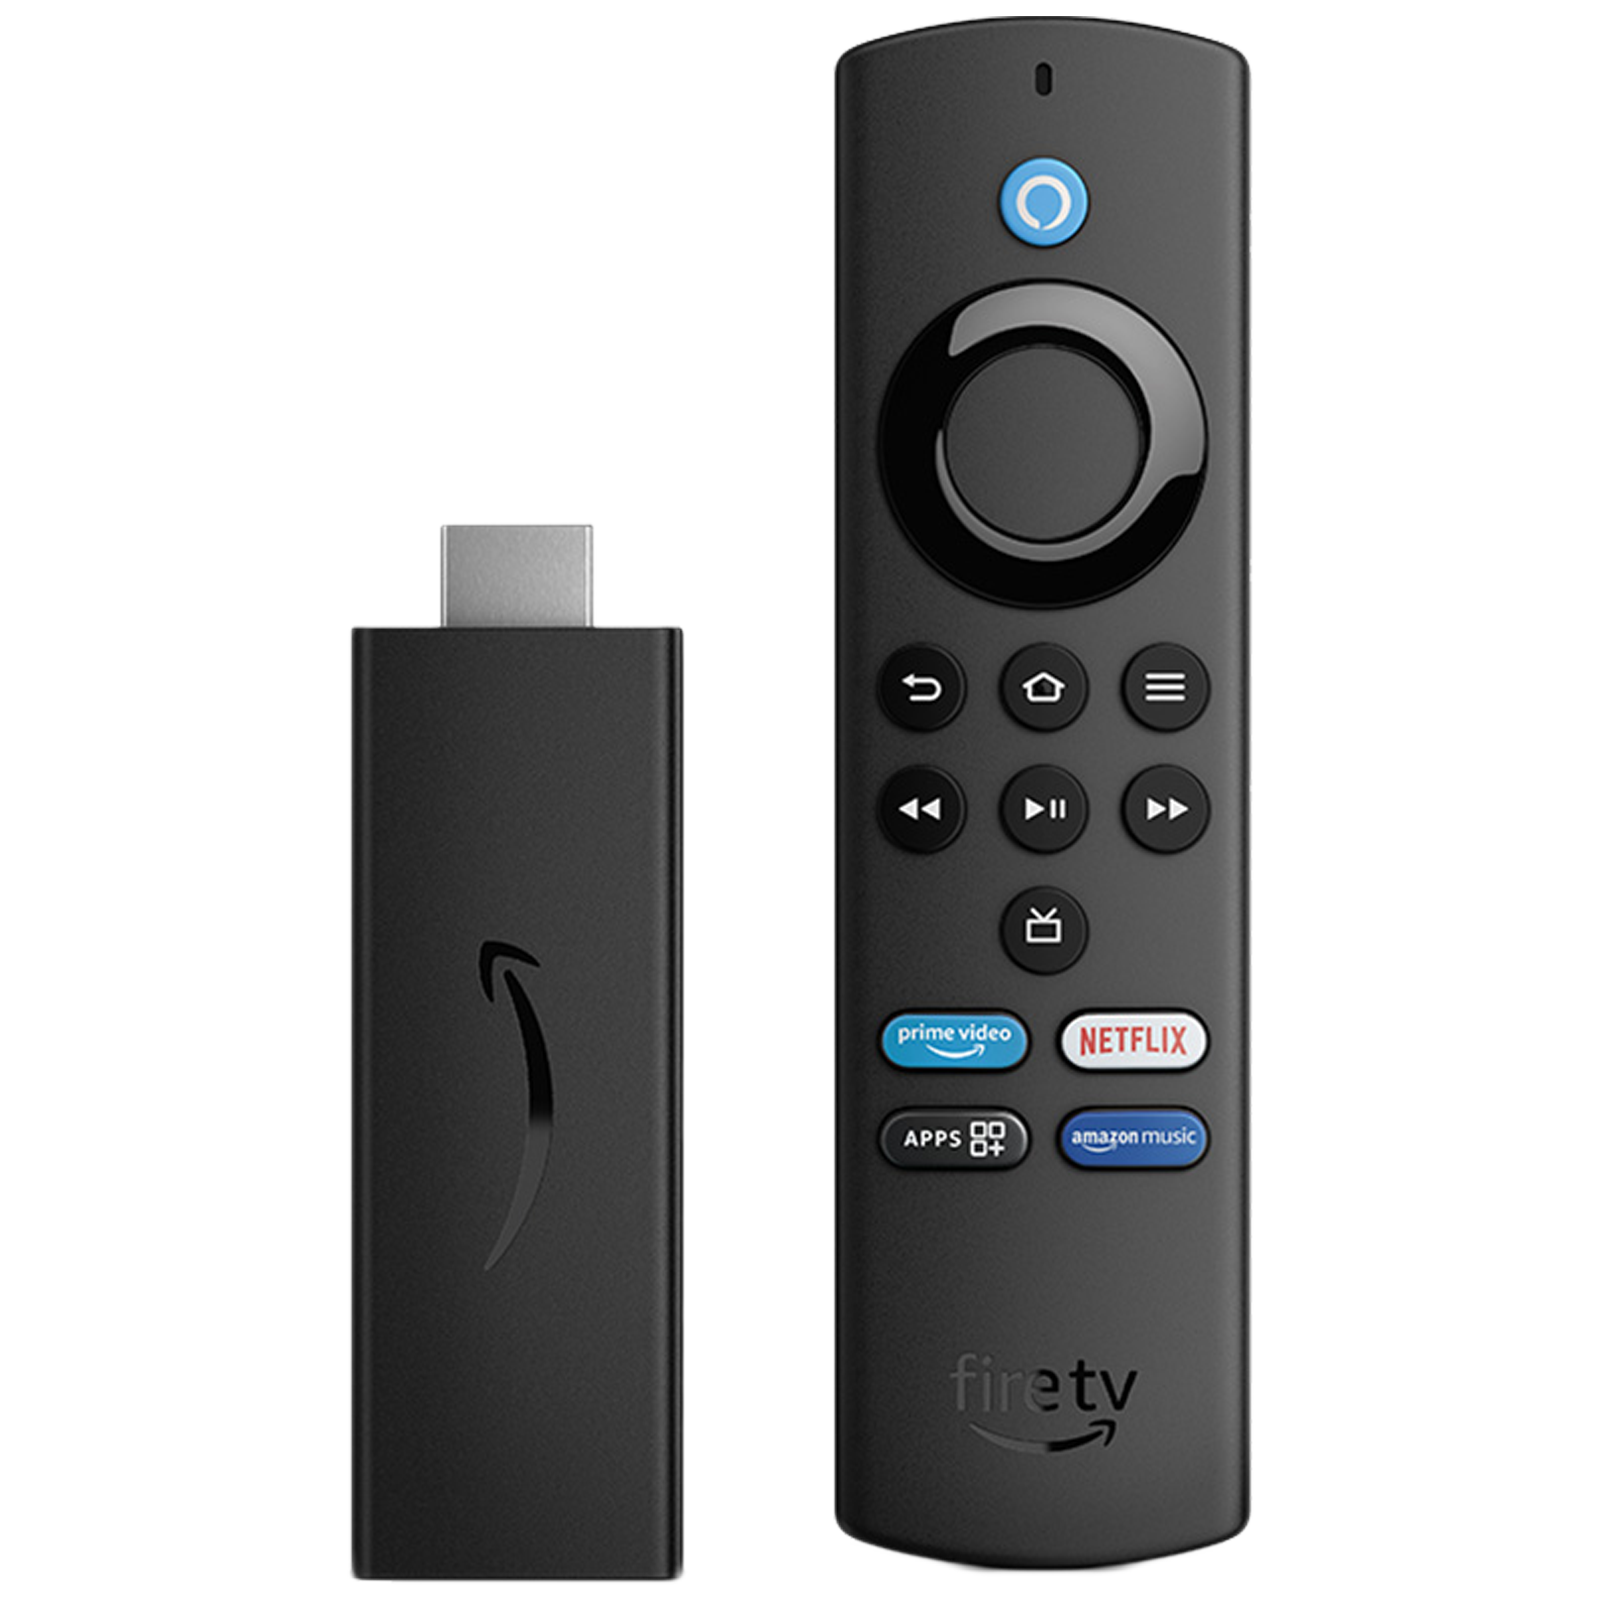 Amazon Fire TV Stick Lite with Alexa Voice Remote (Full HD Video Steaming, B09BY17DLV, Black)